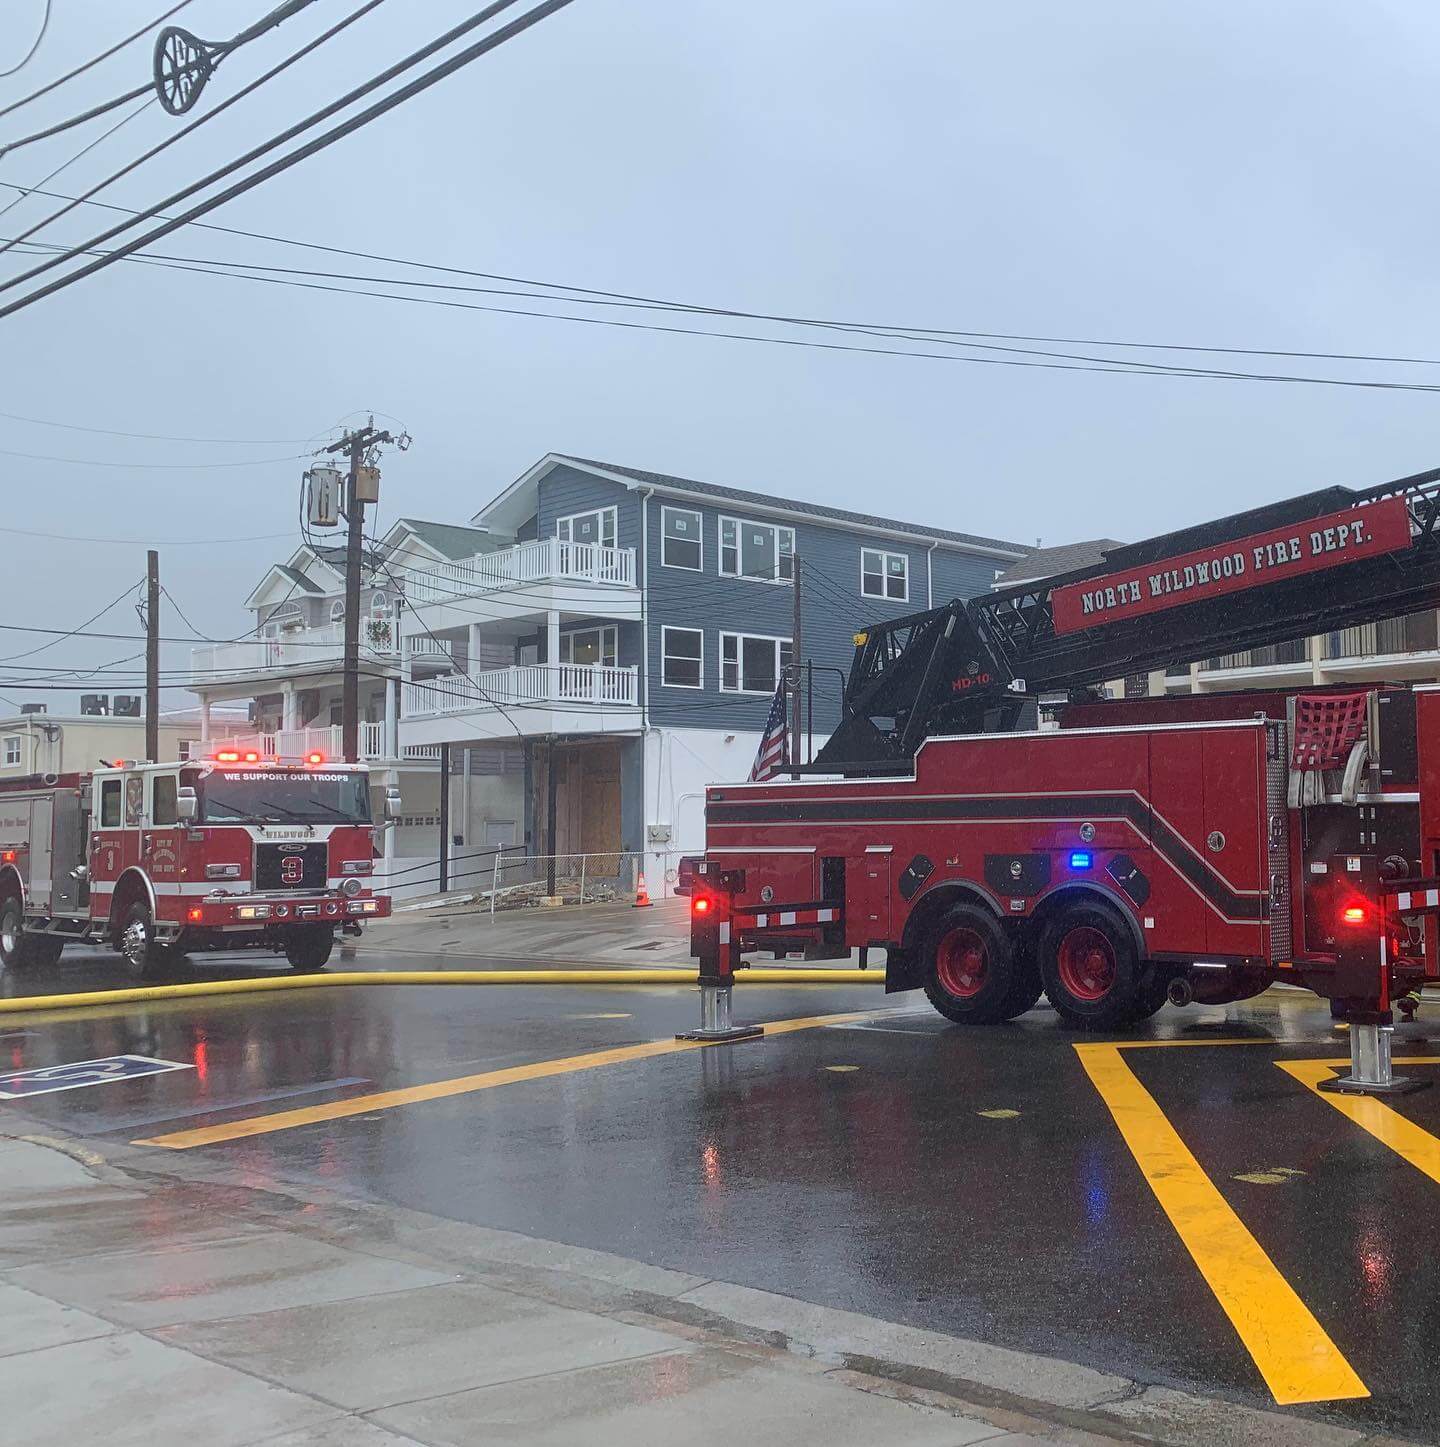 Crews from the North Wildwood Fire Department Oct. 12 spent two hours at a commercial building along the boardwalk while extinguishing a fire located near a walk-in refrigerator. The blaze remained under investigation by the Cape May County Fire Marshal's Office